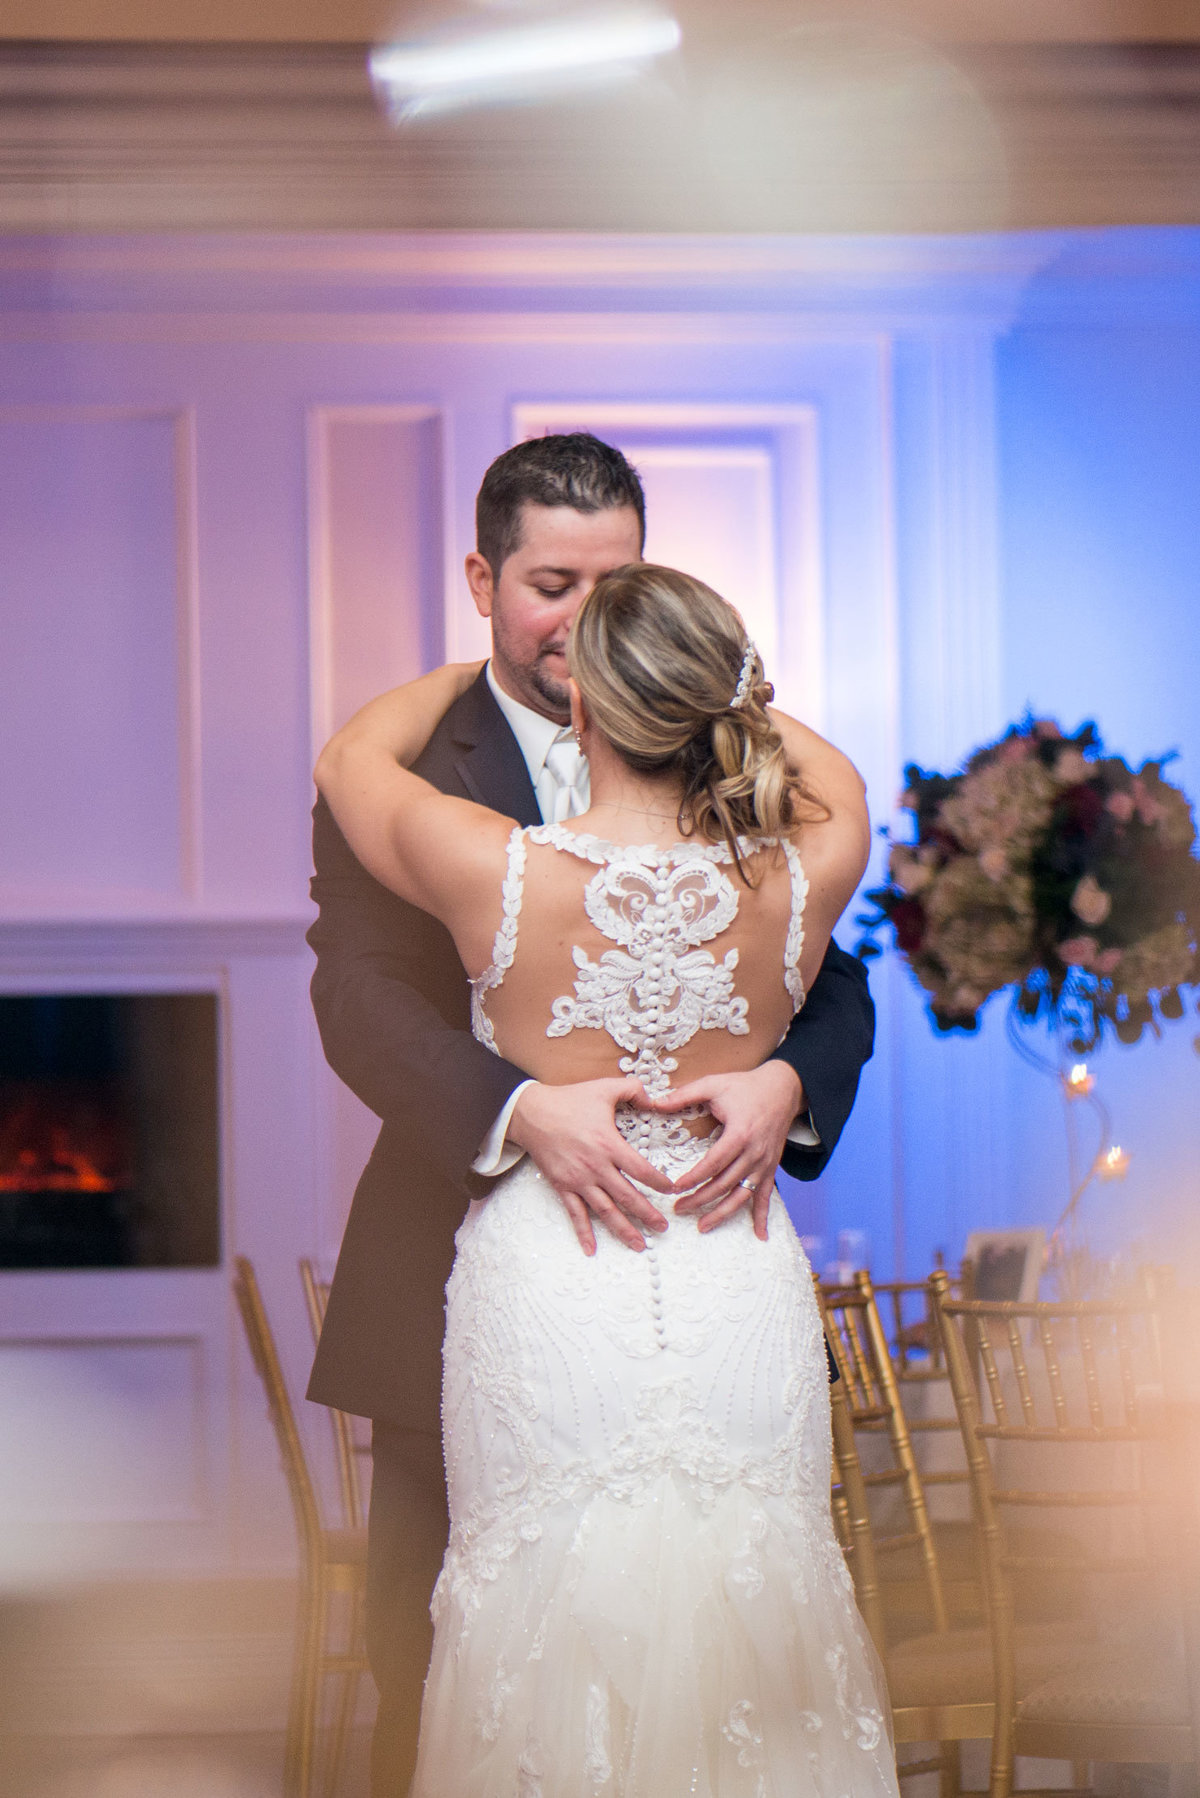 Wedding photos from Soundview Caterers